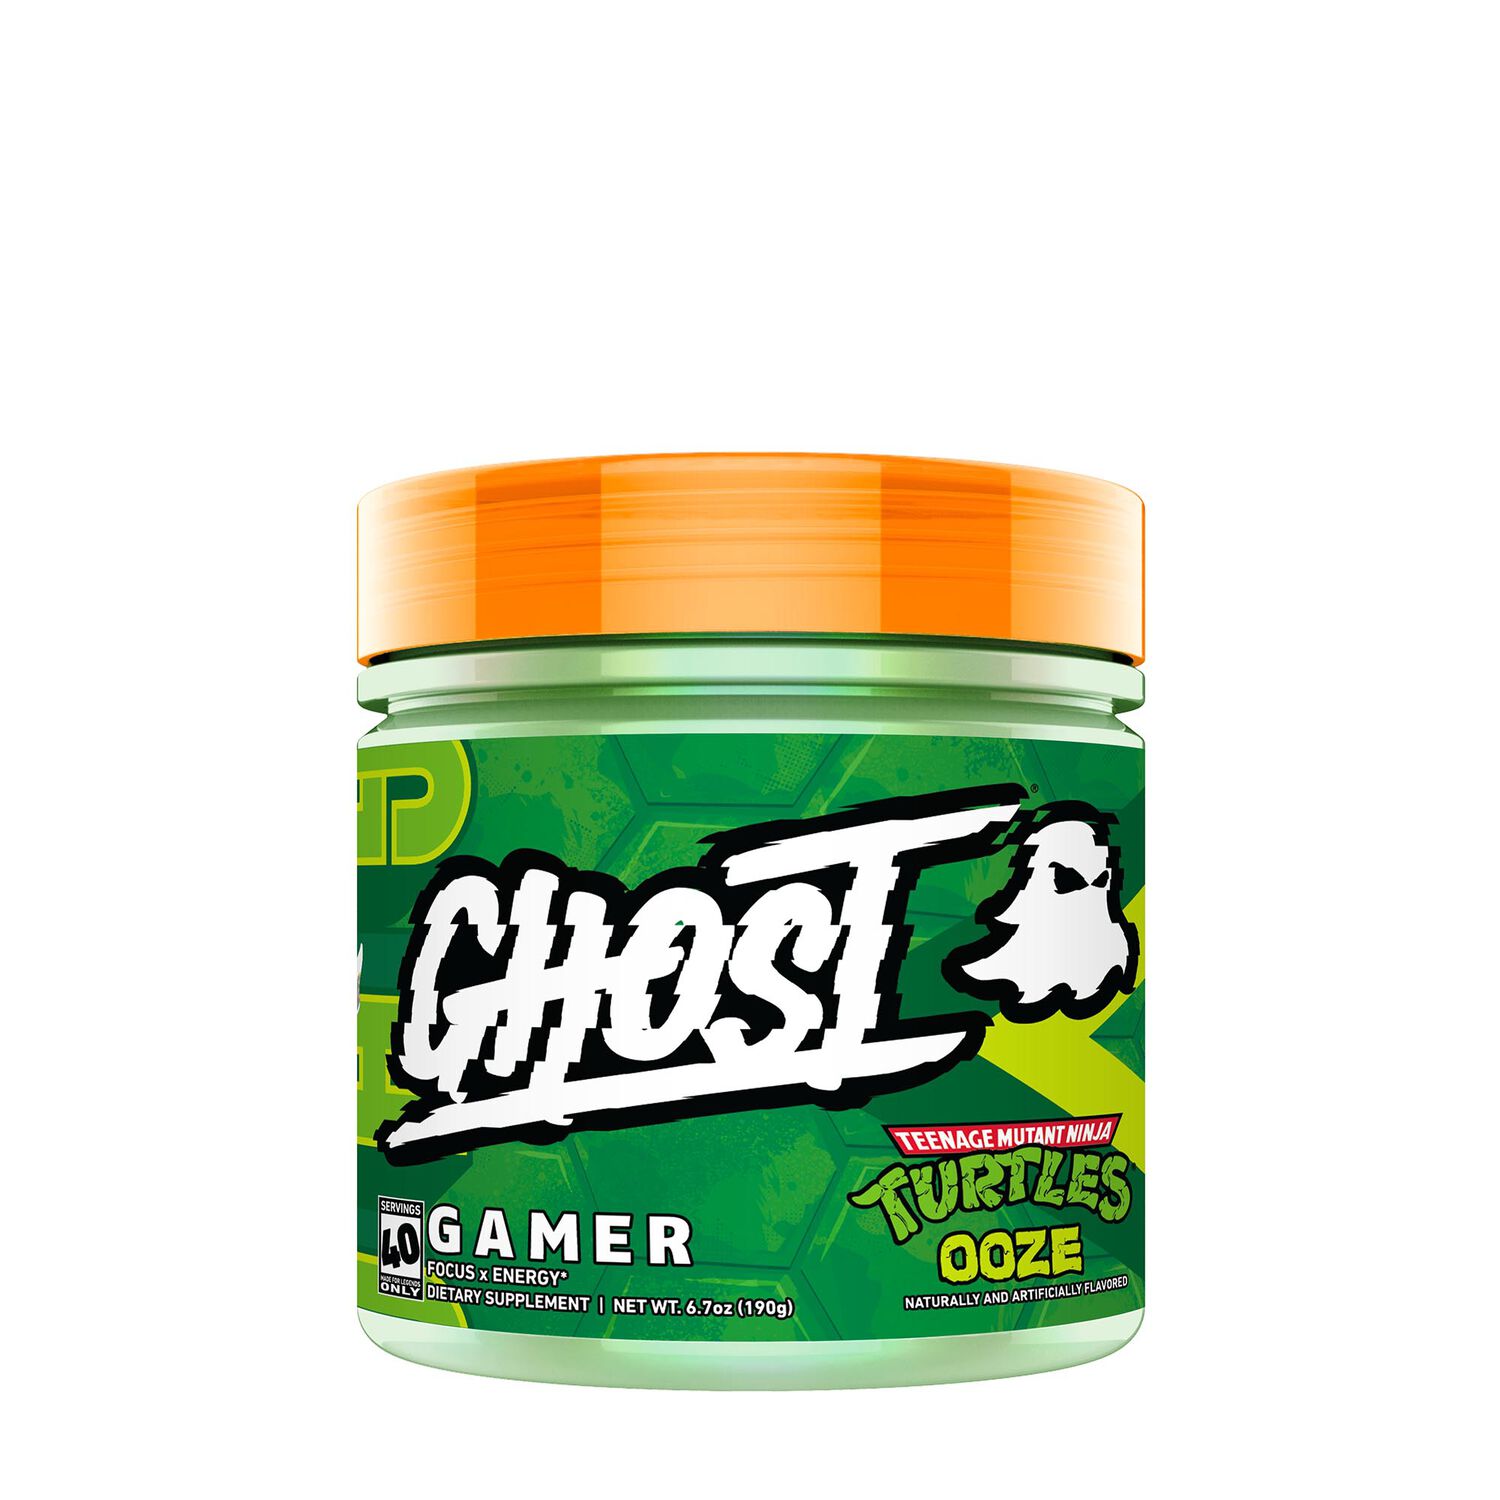 TMNT Ghost Preworkout Giveaway!  Gallery posted by Svpplements